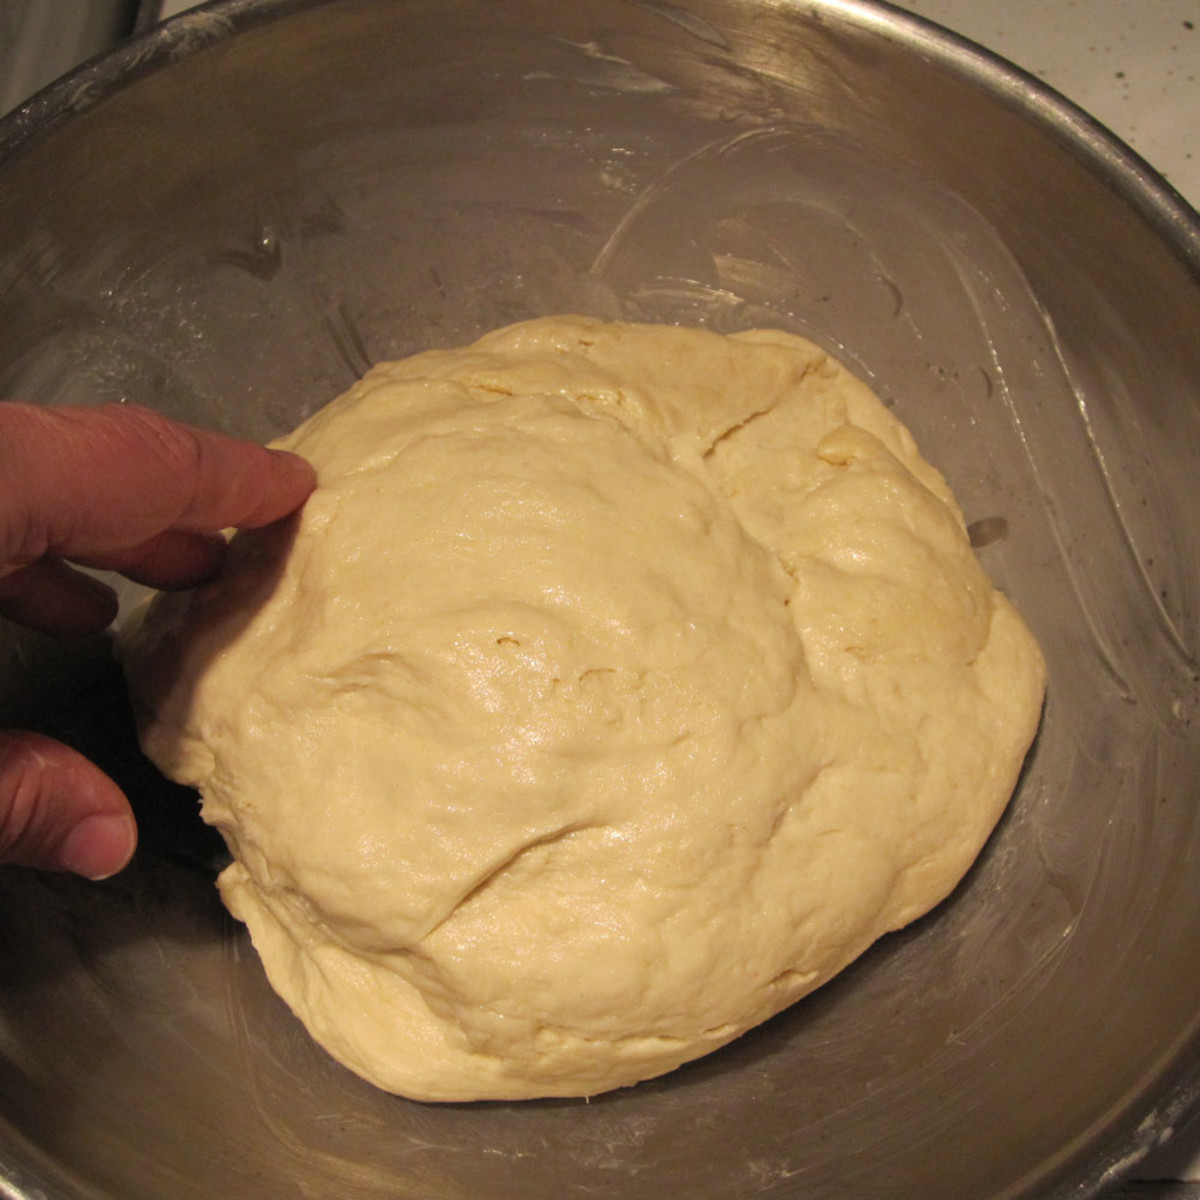 The completed dough is turned into a greased bowl for rising.